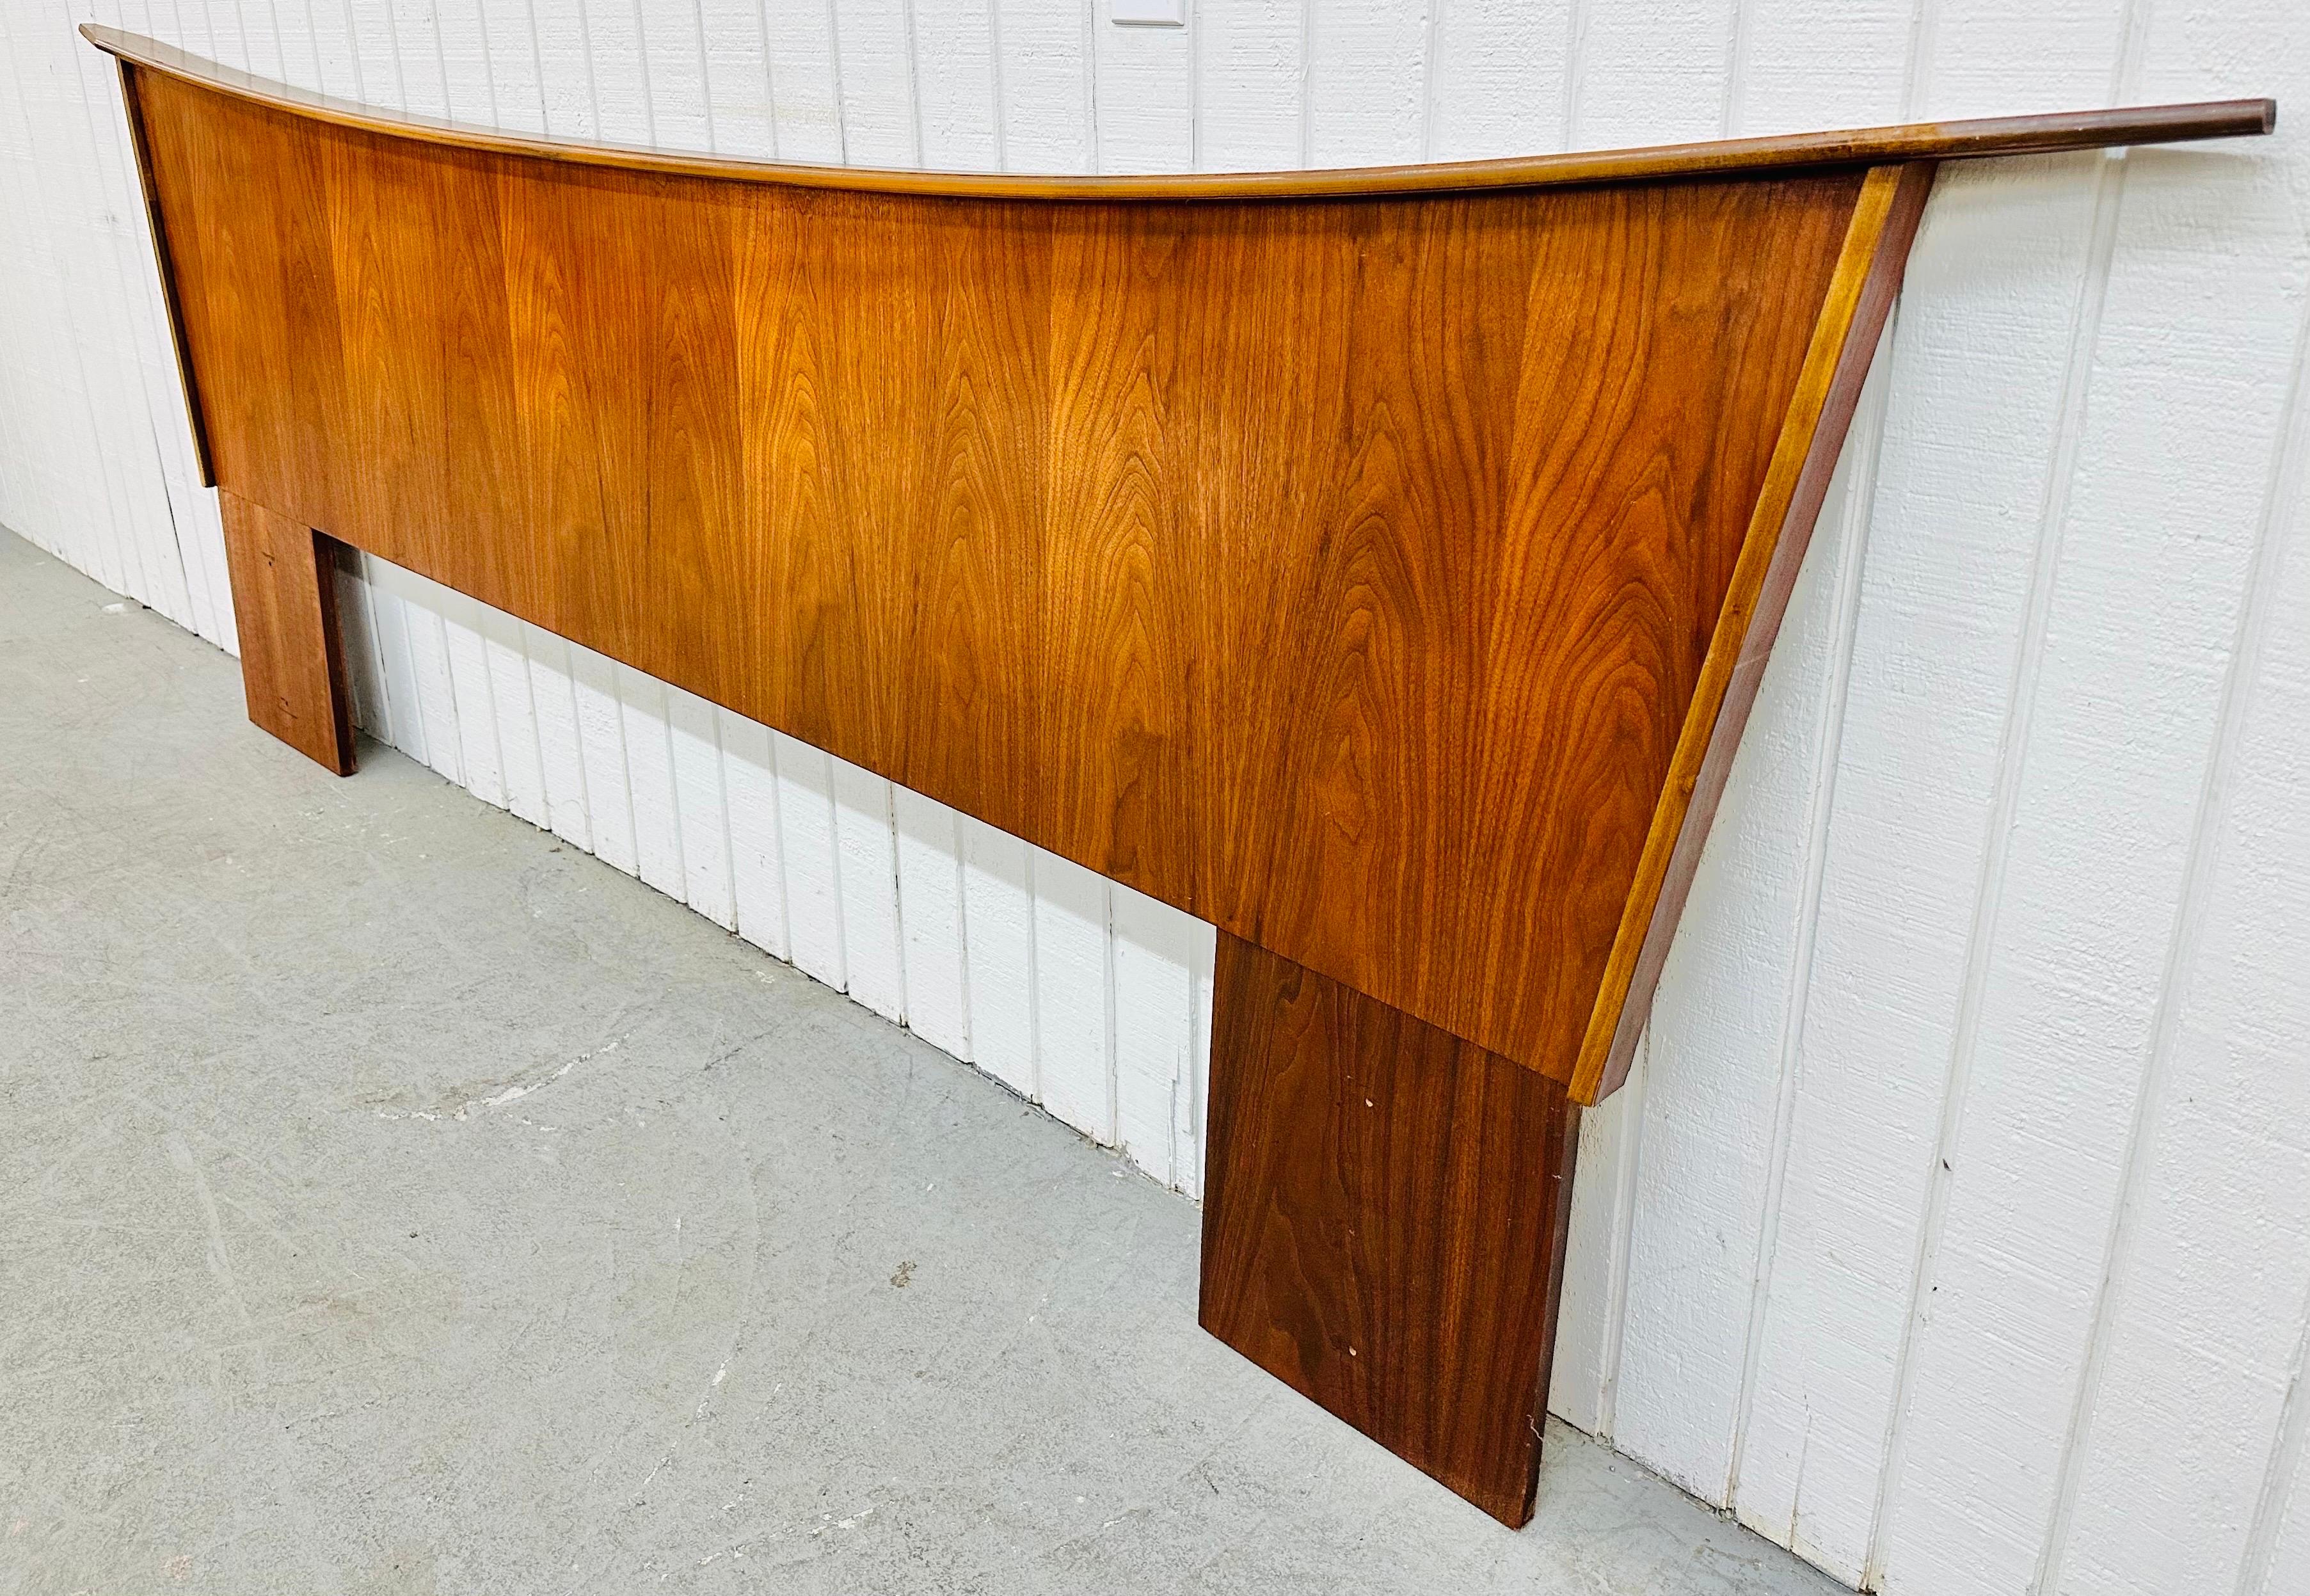 This listing is for a Mid-Century Modern Kagan Style Walnut King Headboard. Featuring a Kagan style curved  design, angled sides, and a beautiful walnut finish. This is an exceptional combination of quality and design!